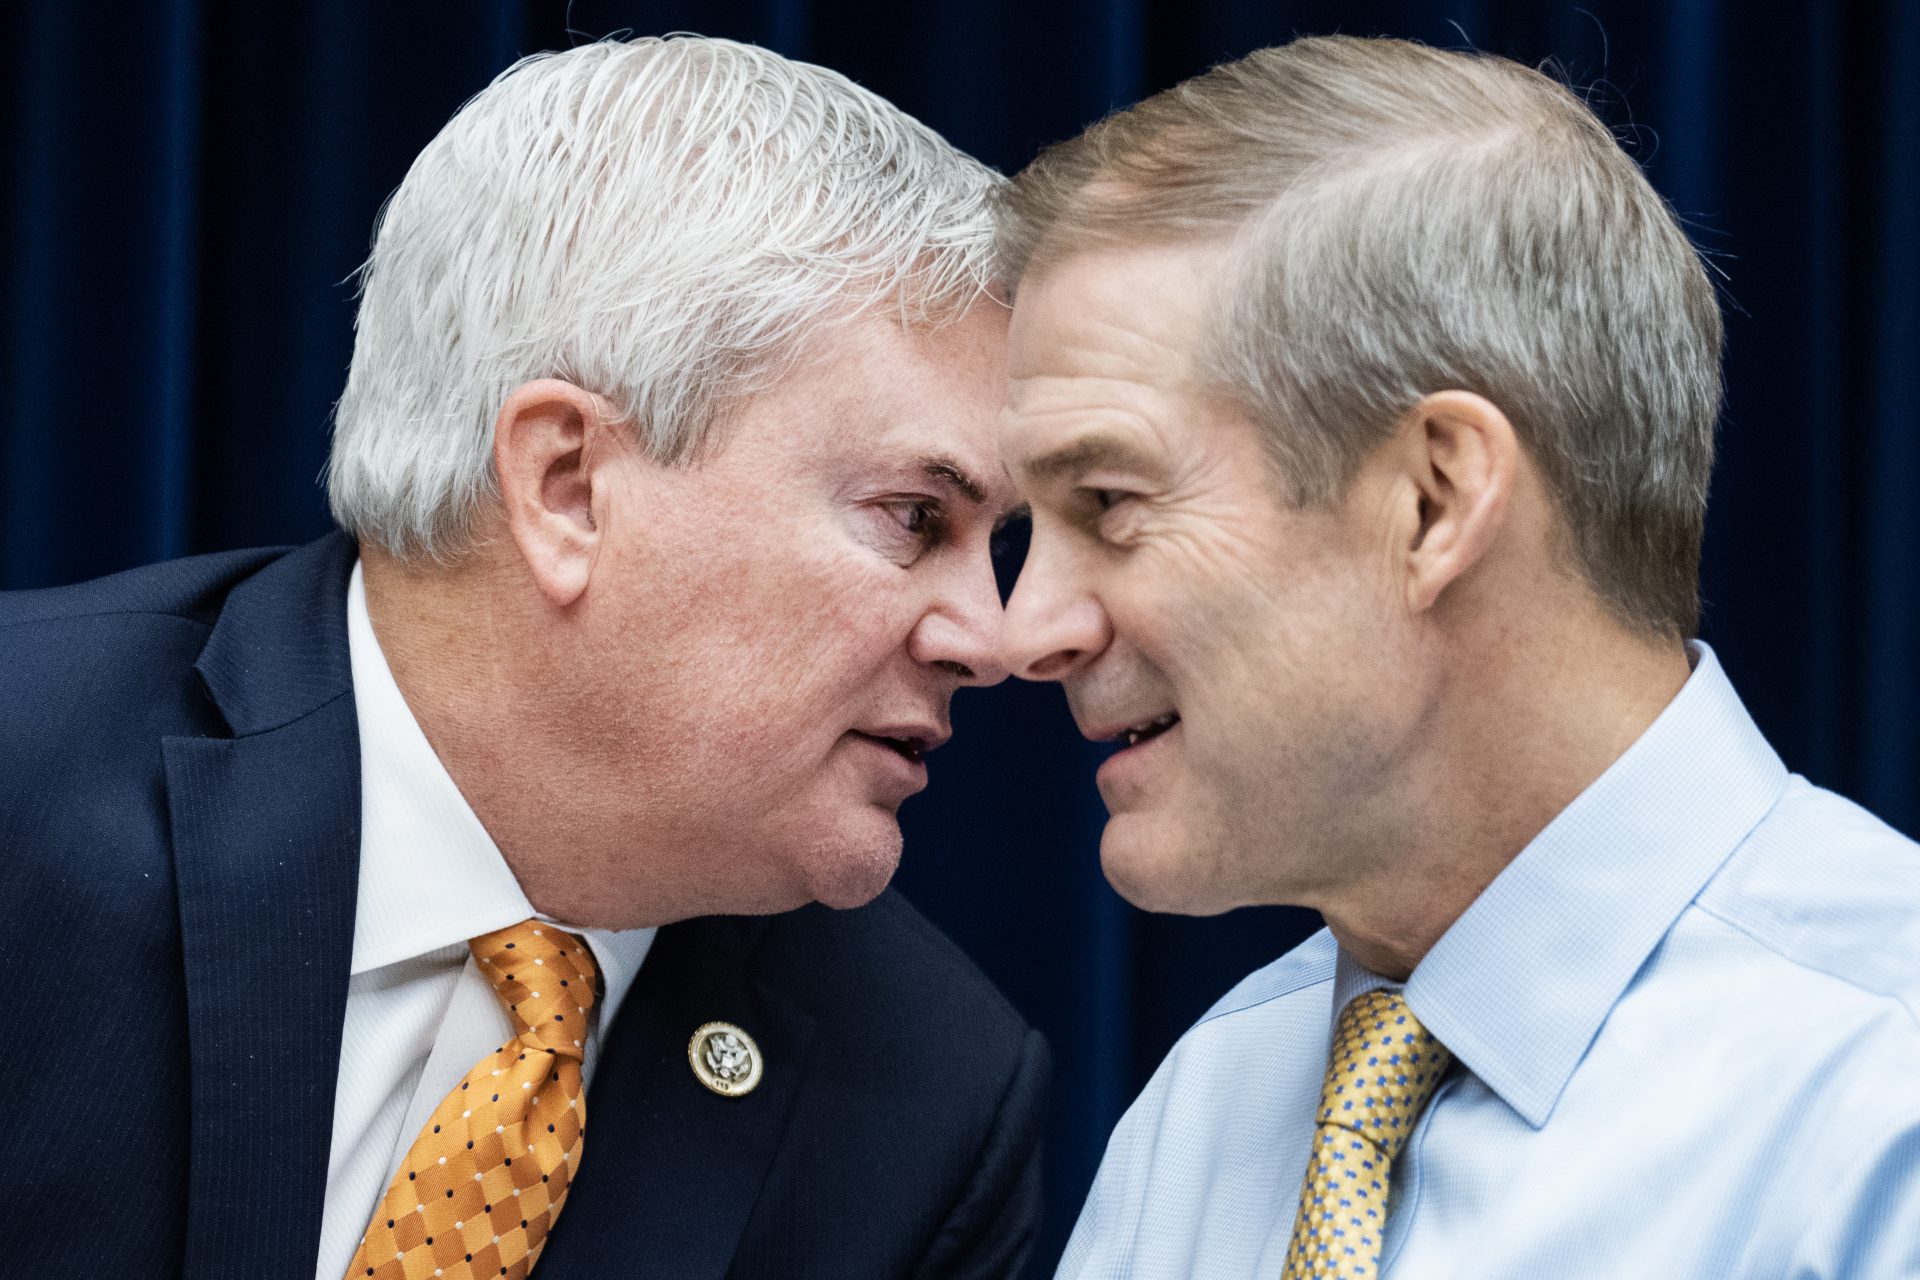 Comer and Jordan are willing to use Russian information